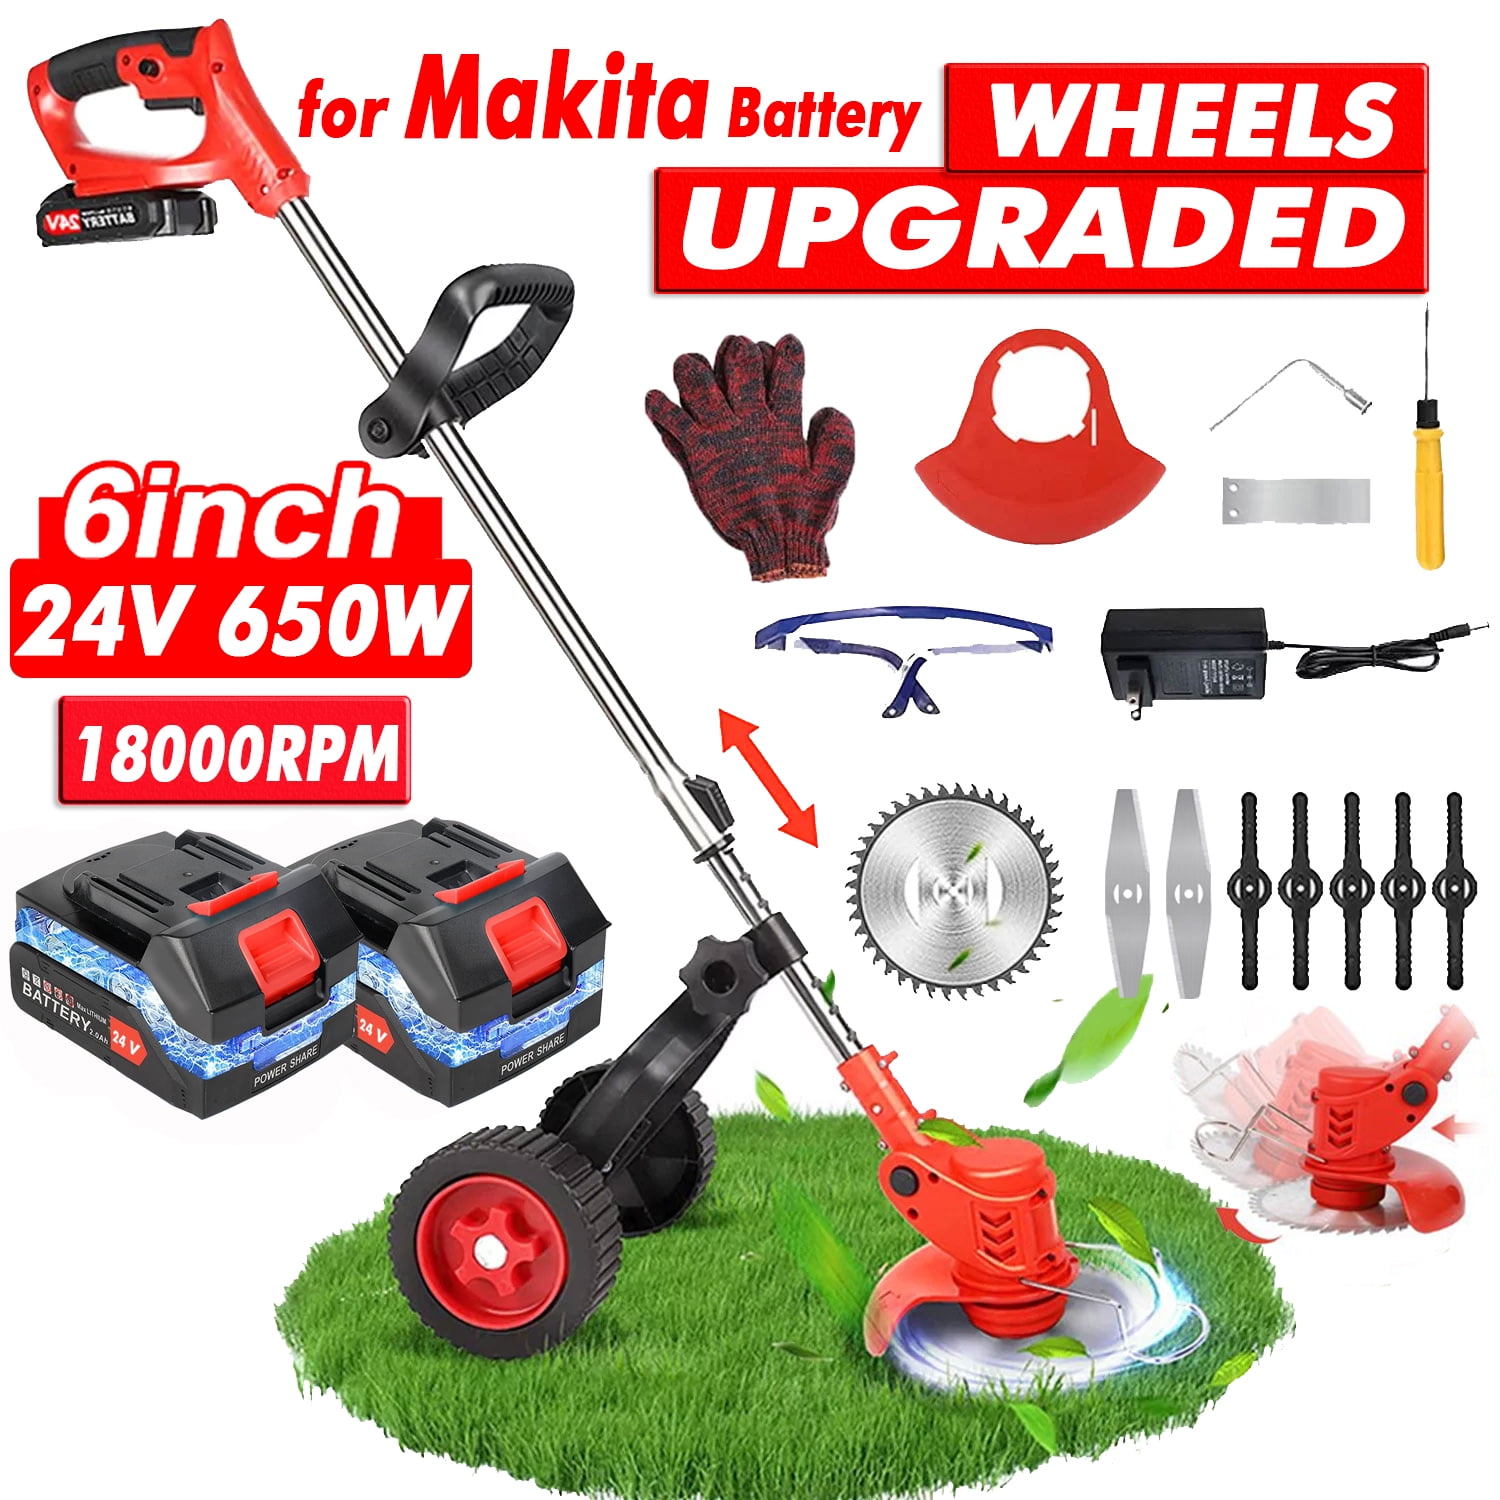 Grass Cordless Electric Weed Eaters & Weed Trimmer, Tanbaby 6 inch Weed with Upgraded Wheels - Walmart.com